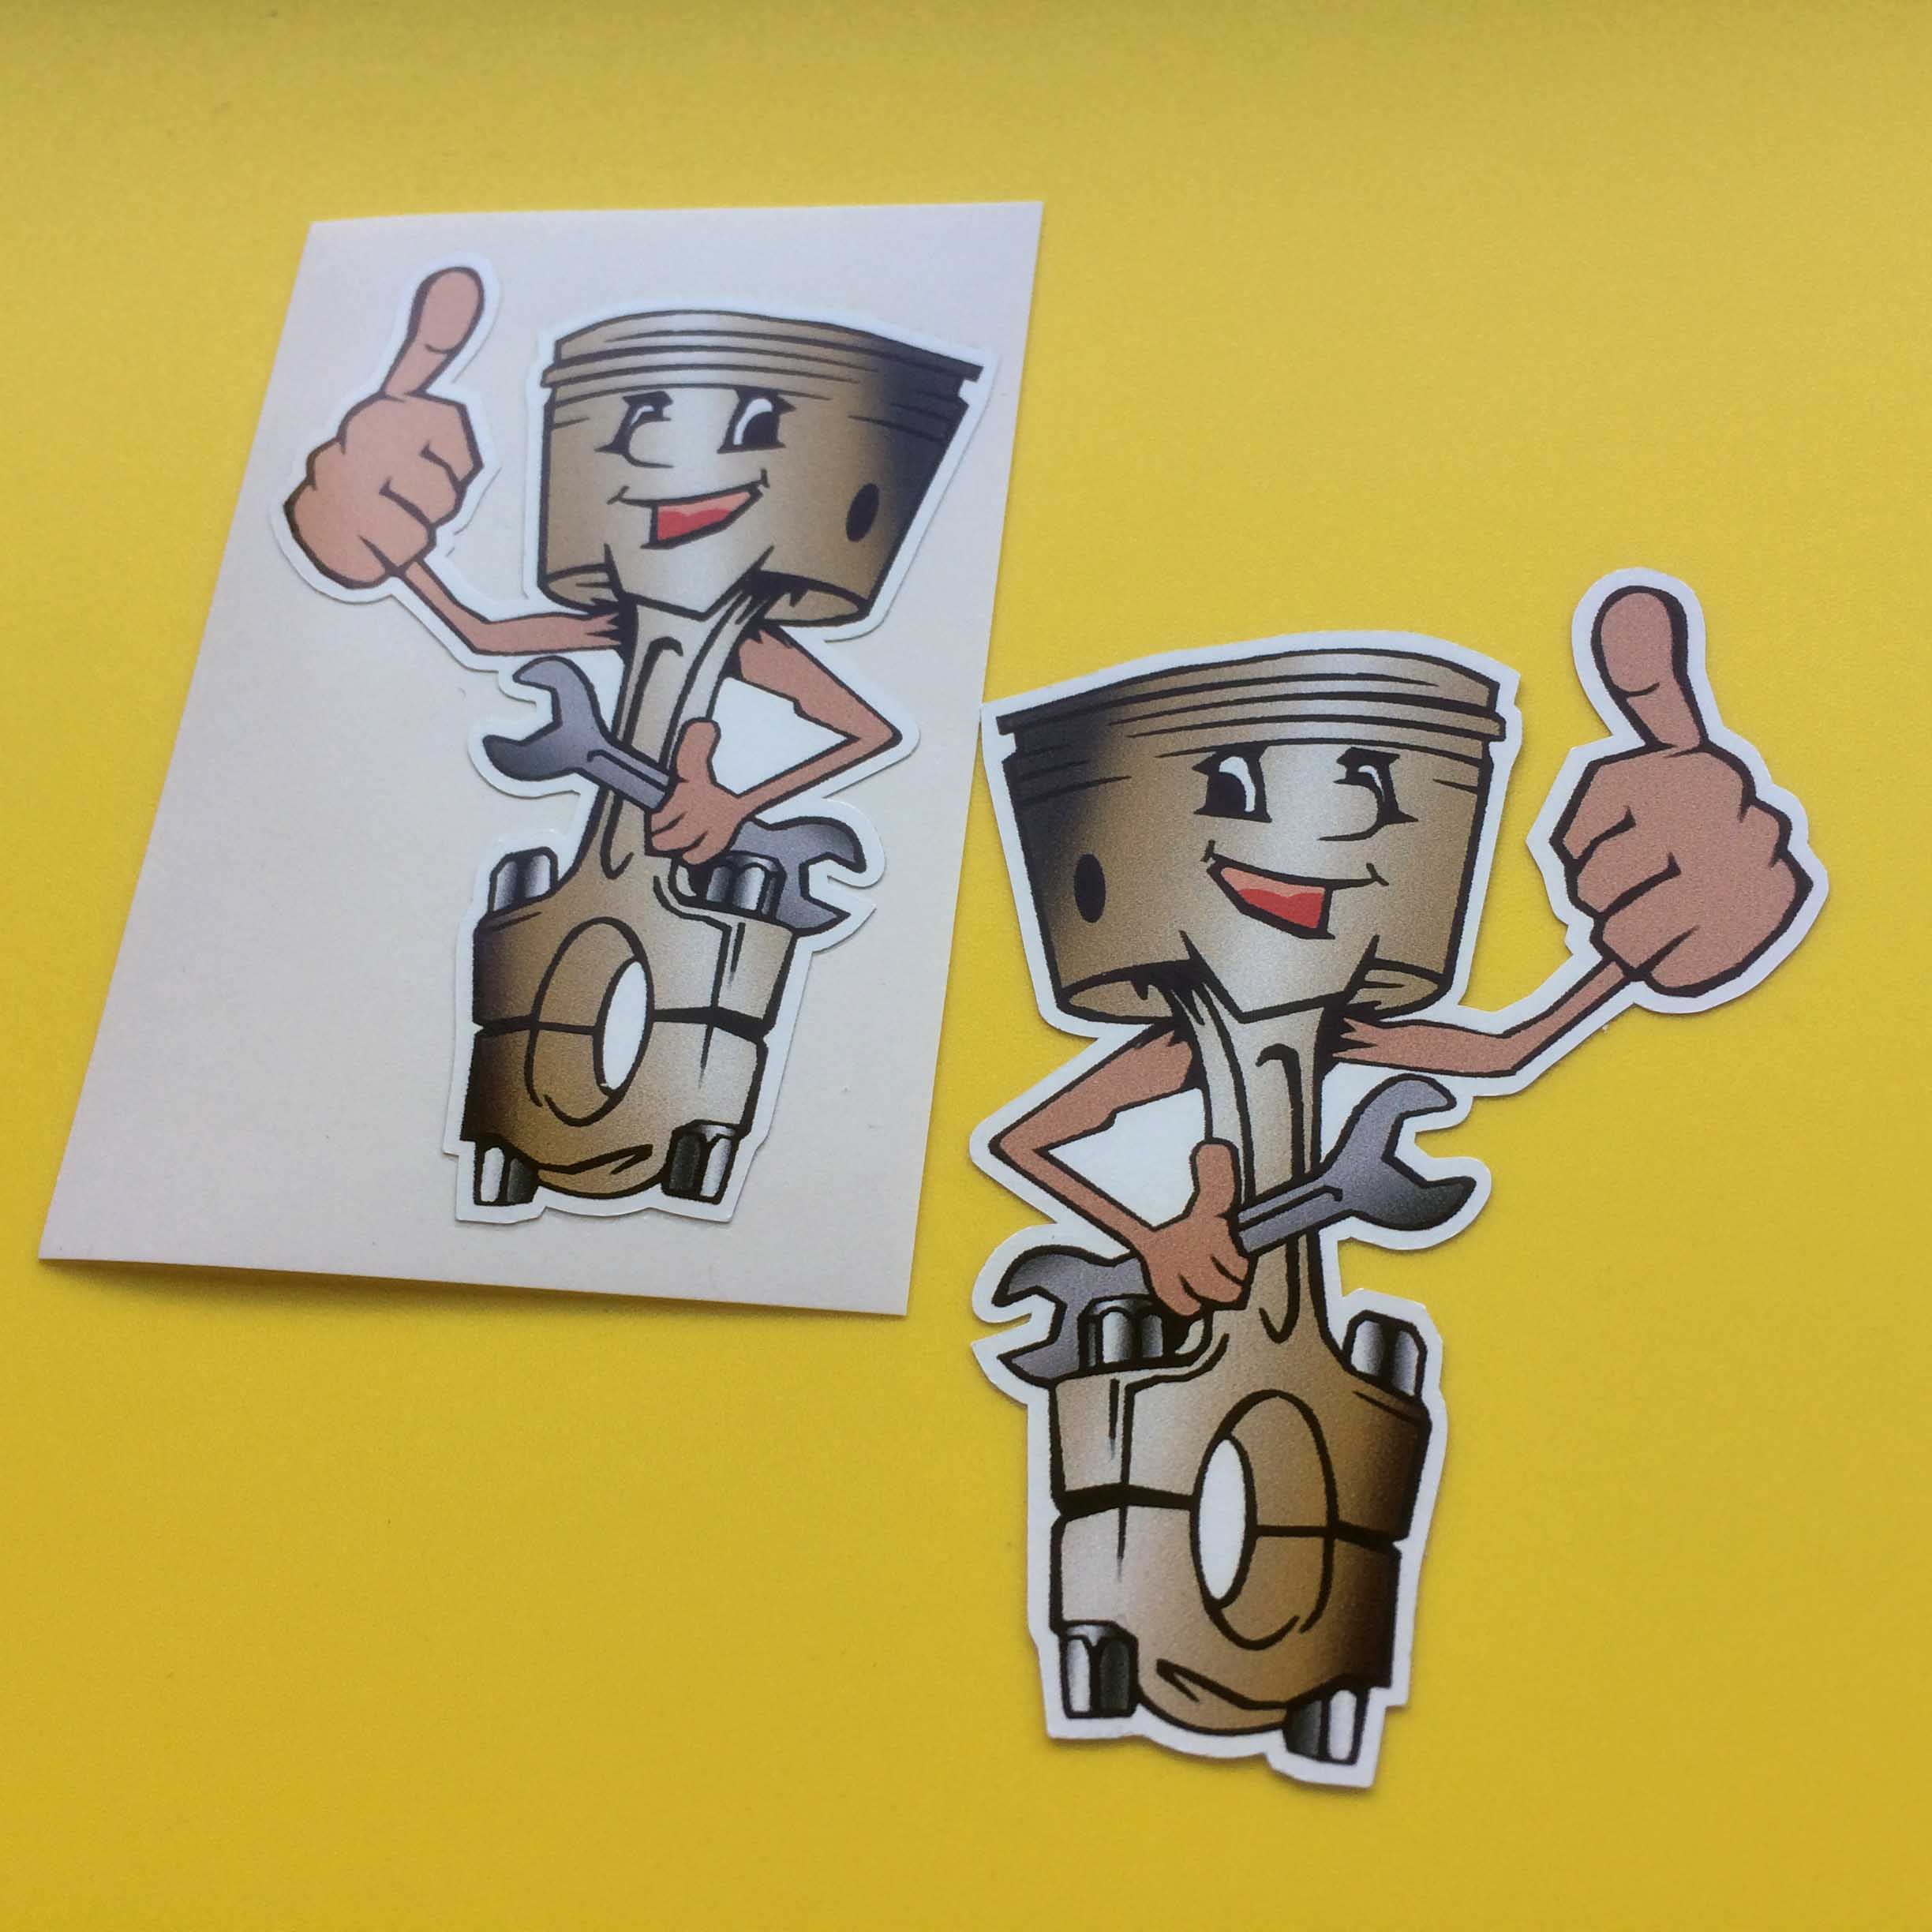 A cartoon image of a piston with a smiling face holding a spanner in one hand and giving the thumbs up with the other.